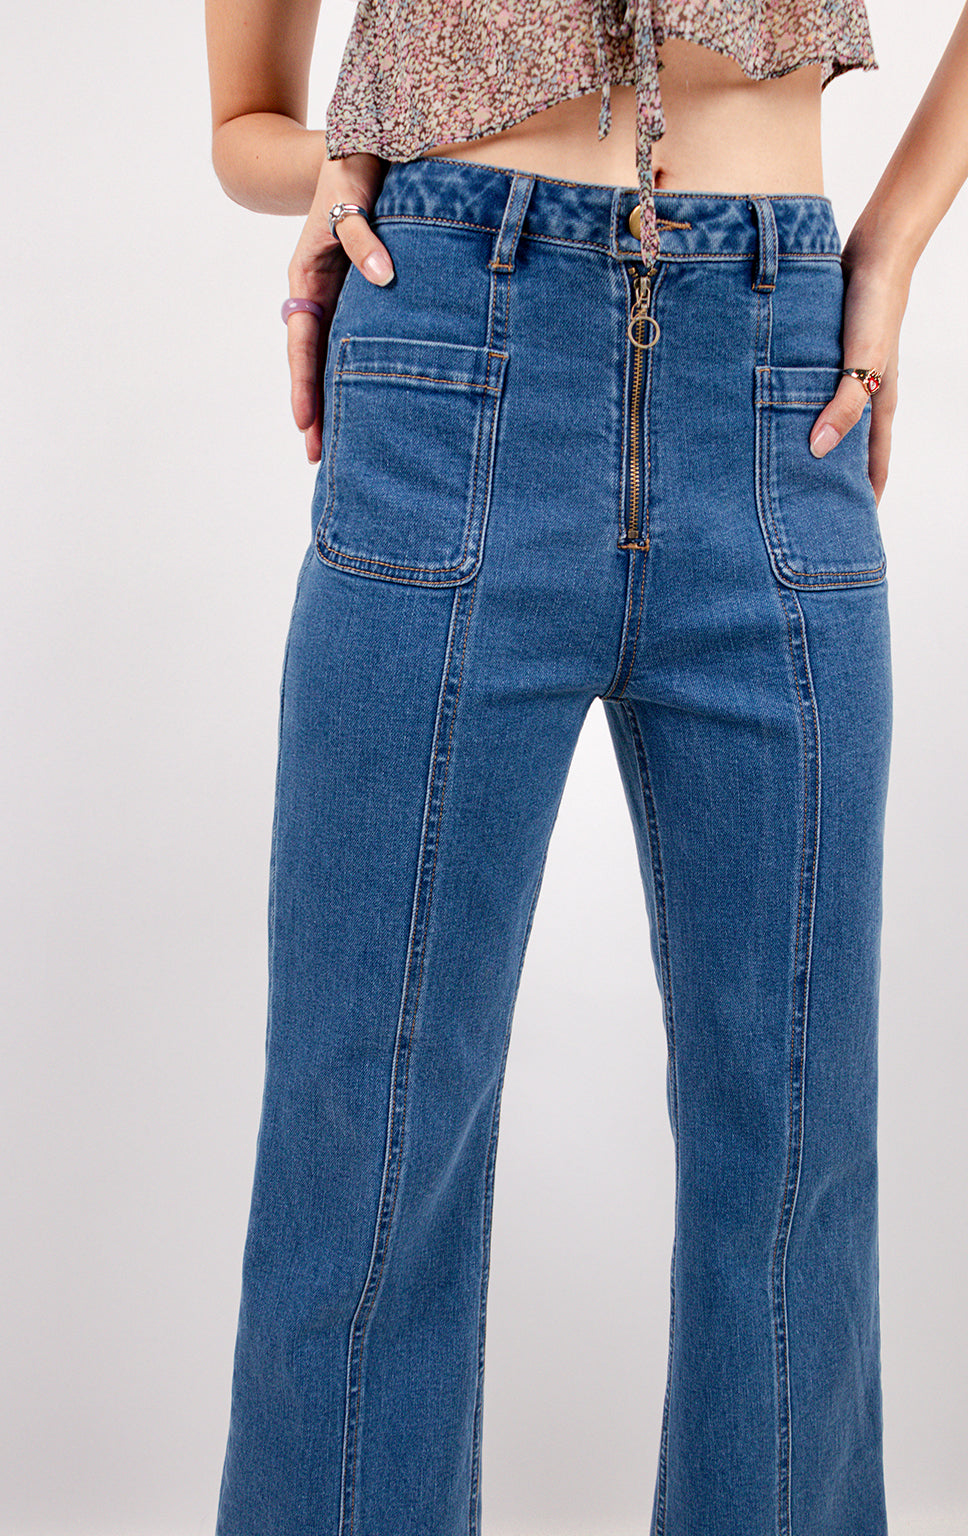 ZIP UP WIDE LEG PINTUCKED JEANS W/ PATCH POCKETS